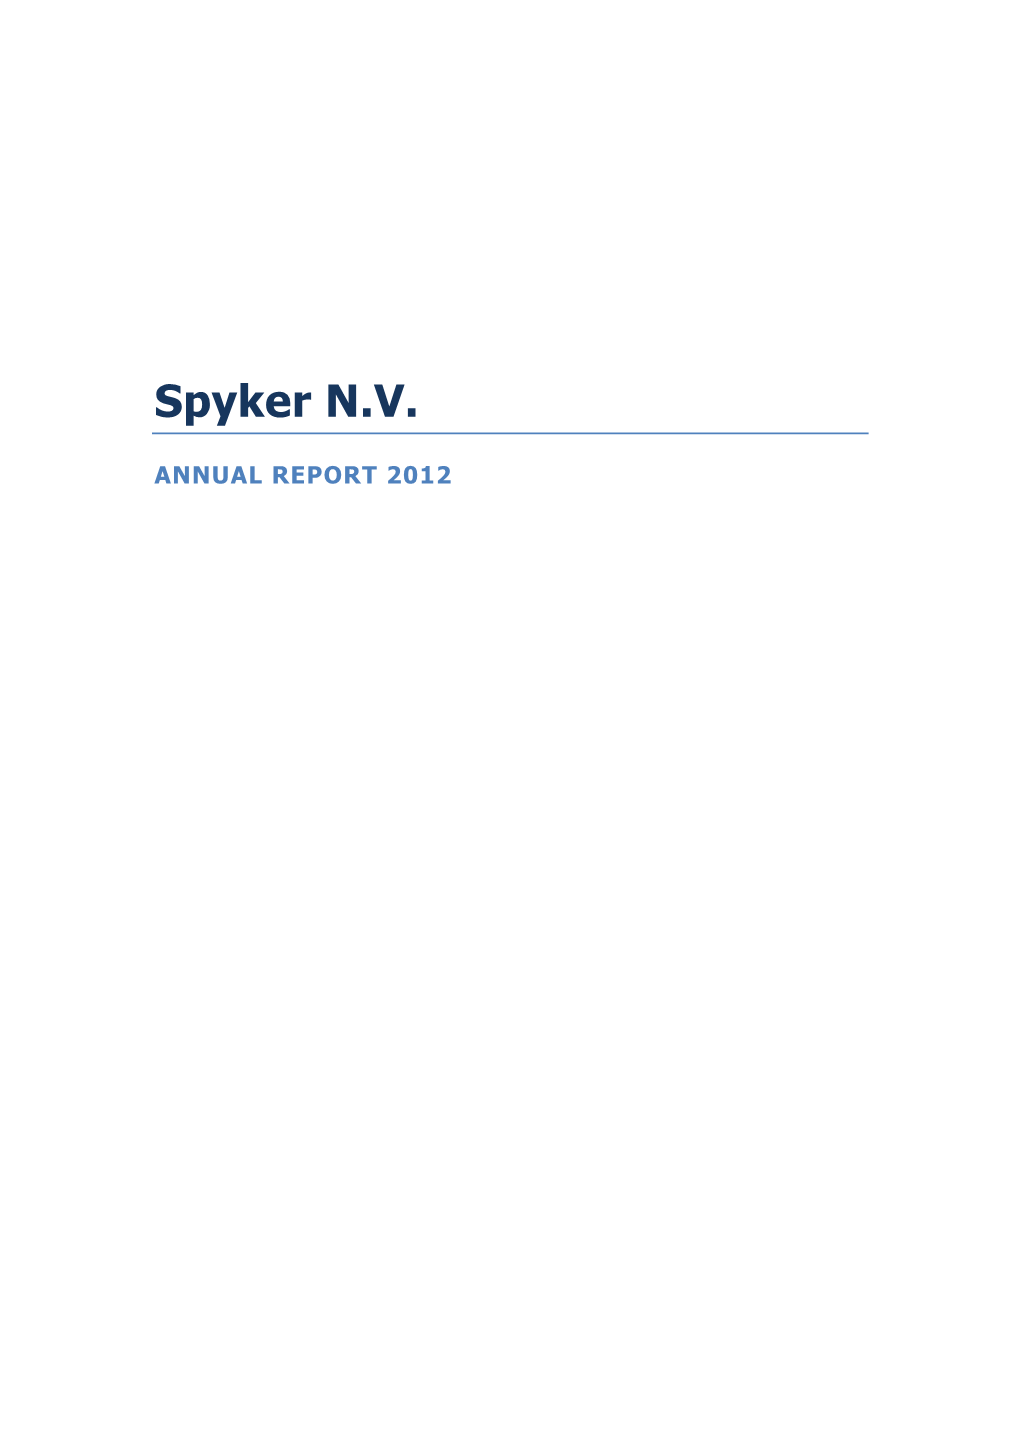 Spyker NV Annual Report 2012